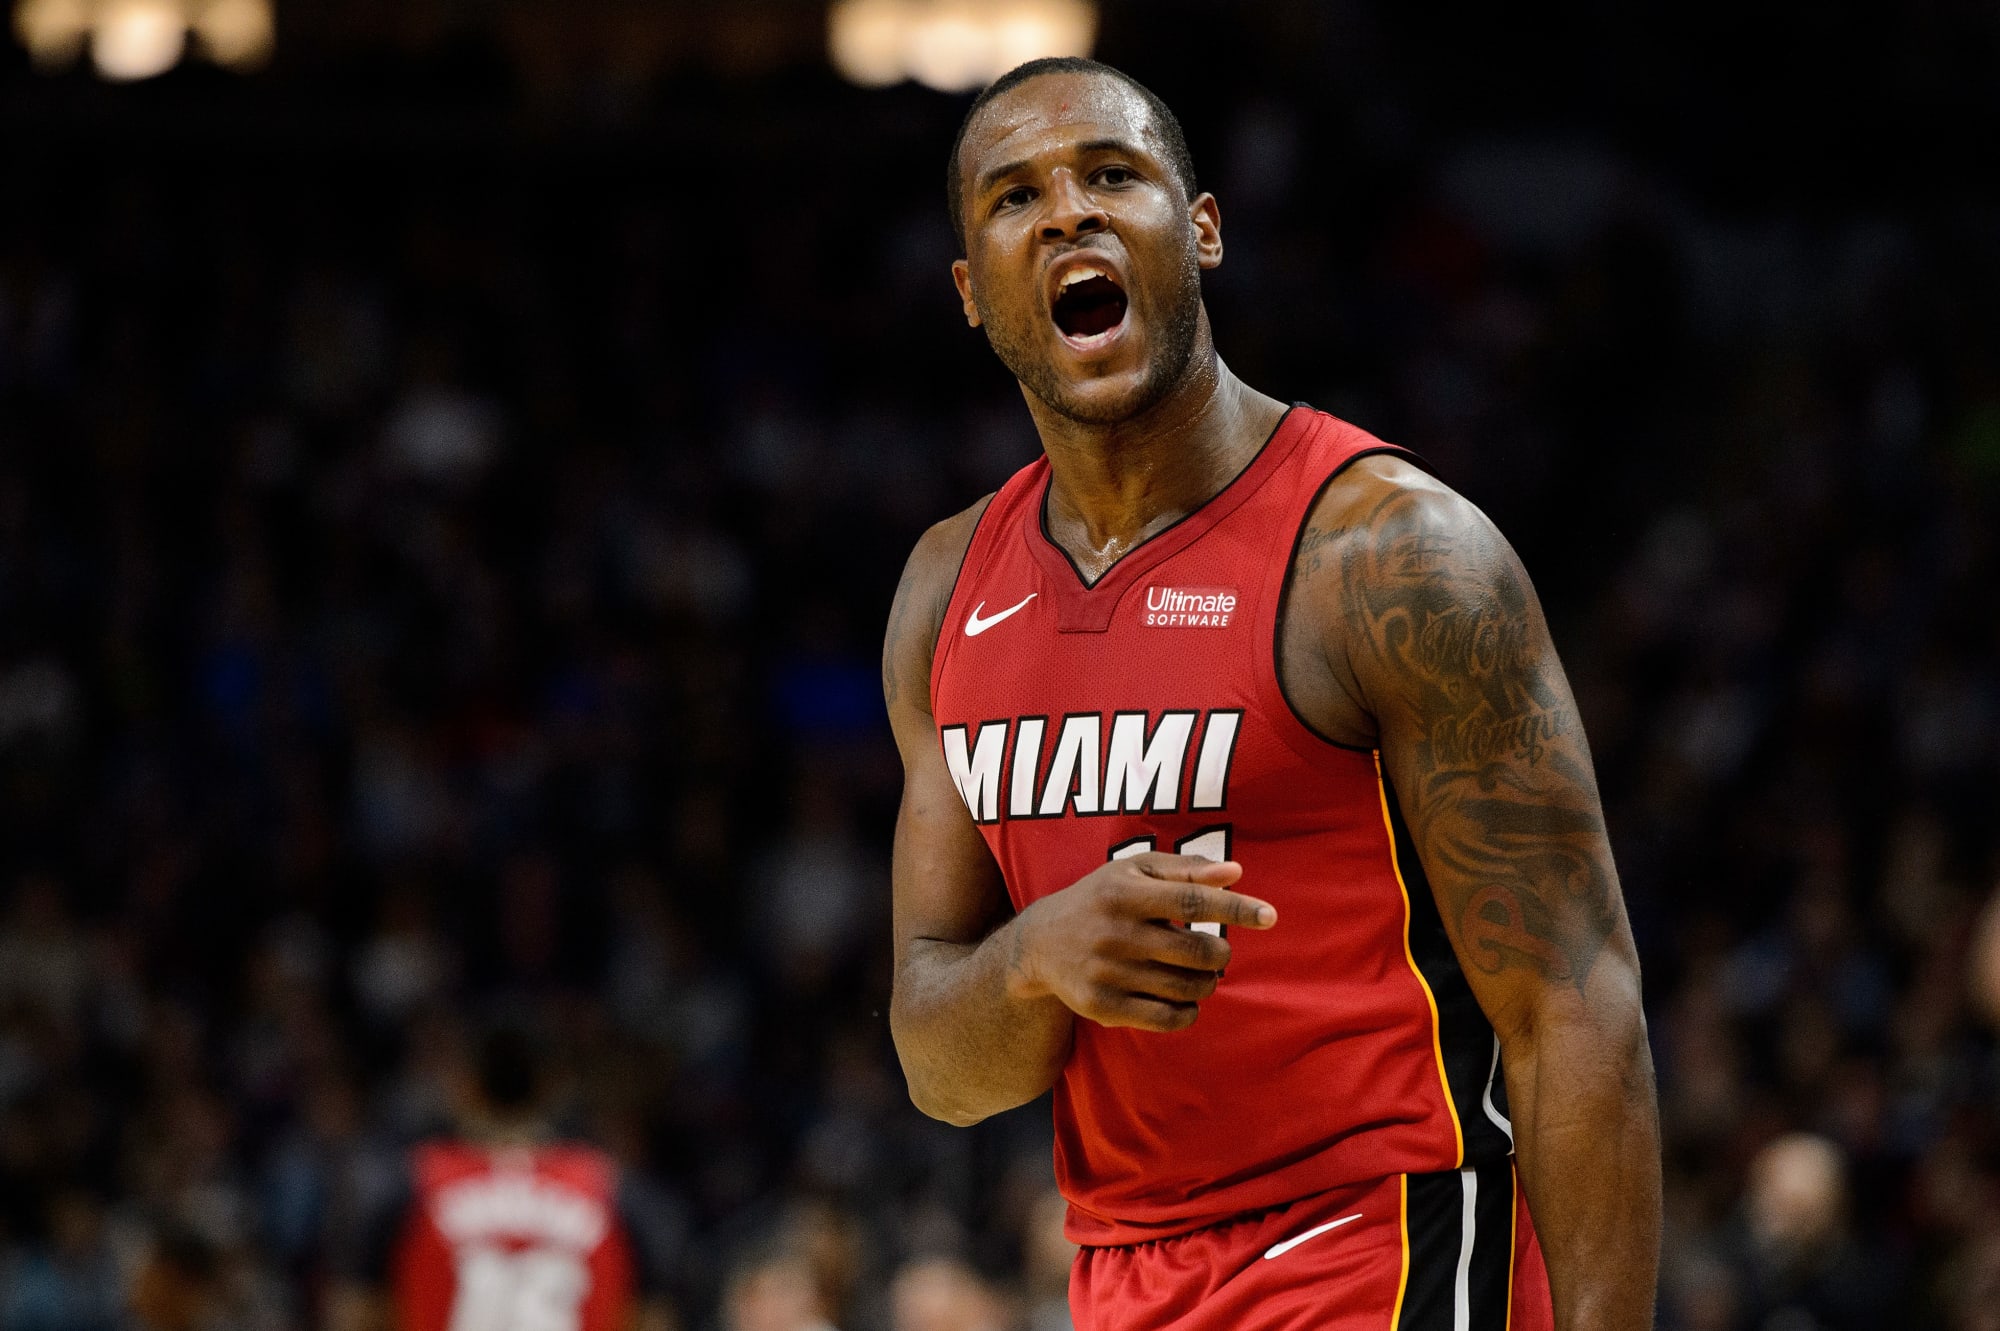 Miami Heat Basketball is about so much more than numbers